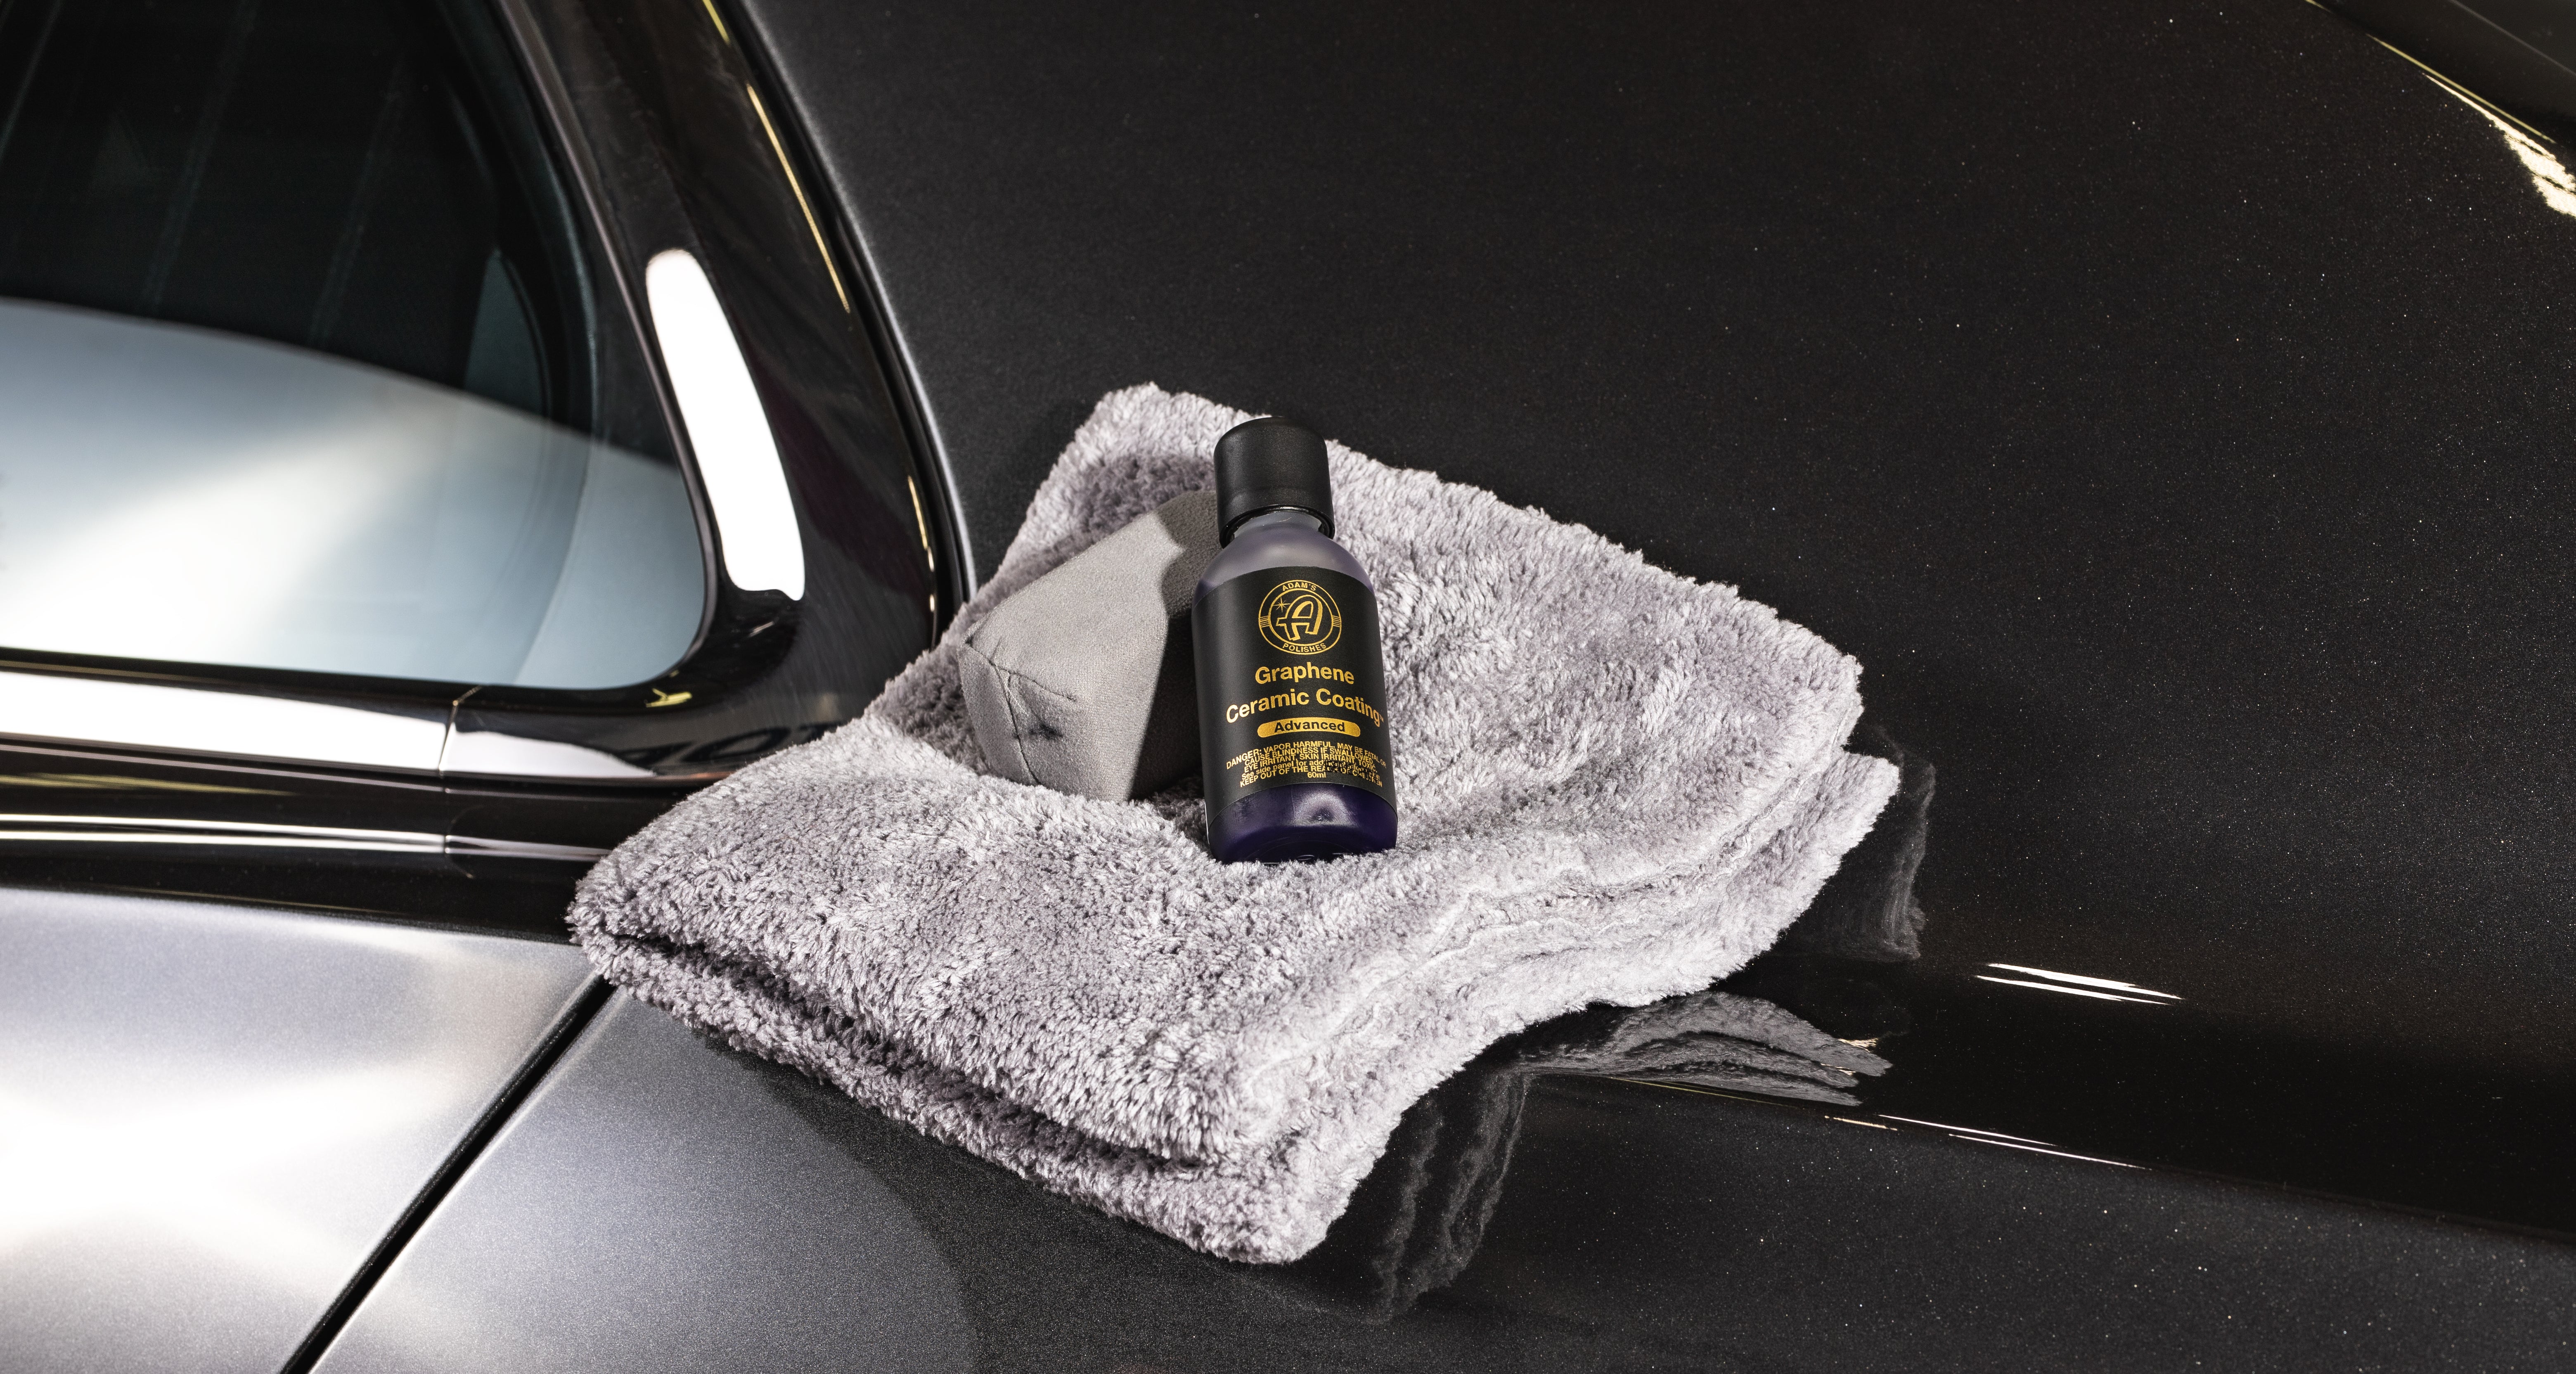  Adam's Polishes Advanced Graphene Ceramic Coating - 10H Graphene  Coating for Auto Detailing, 9+ Years of Car Protection & Patented UV  Technology, Apply After Car Wash & Paint Correction : Automotive